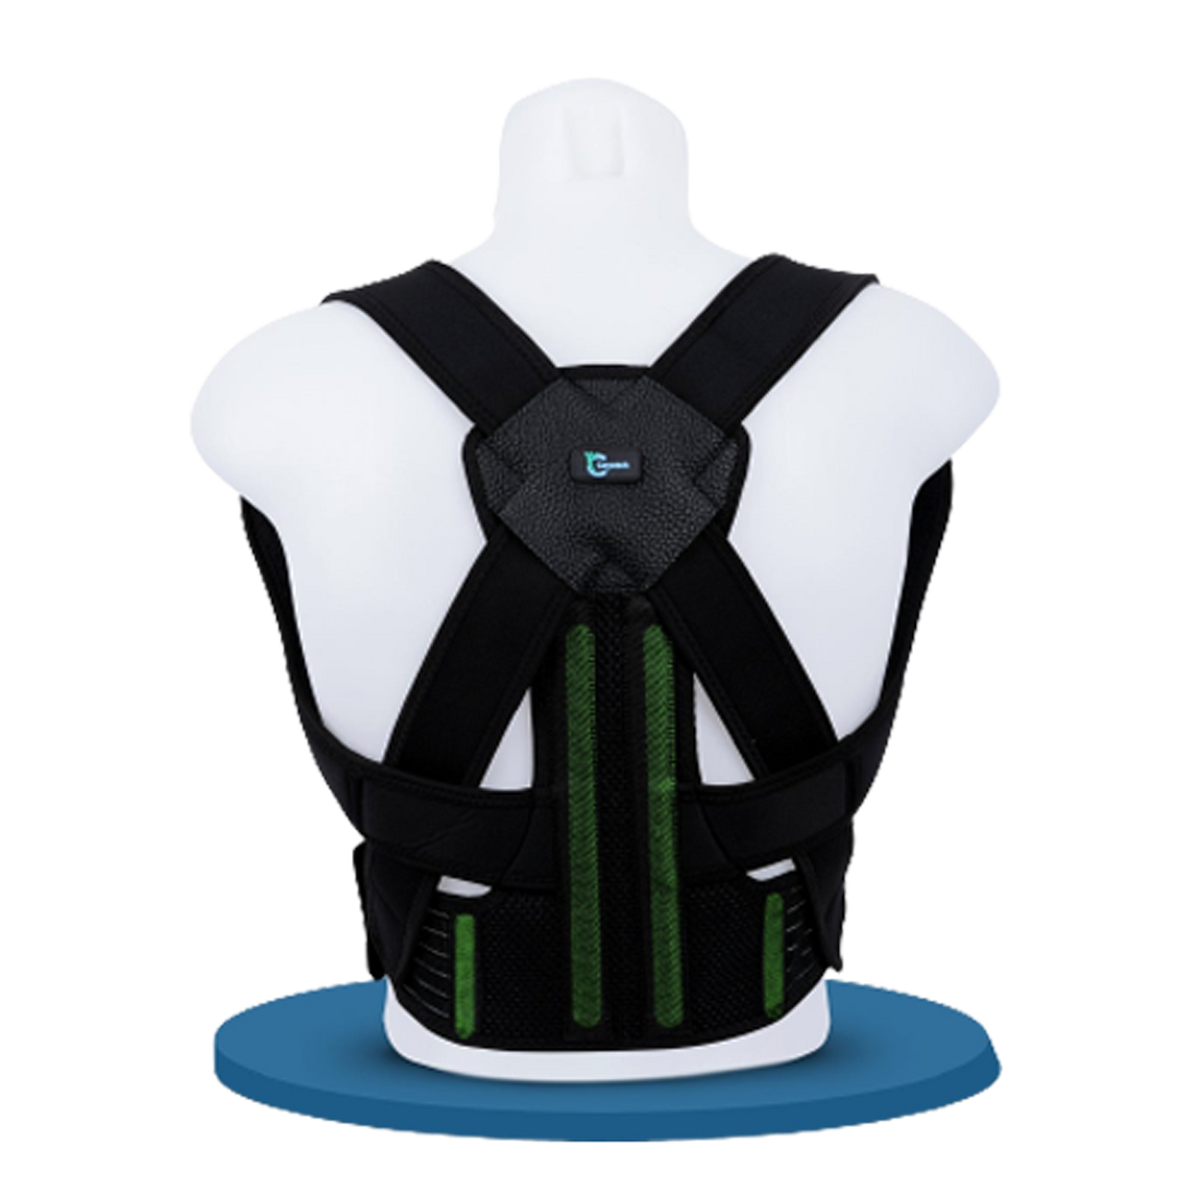 Relieve Back Pain & Improve Posture With Full Back Support Posture Corrector